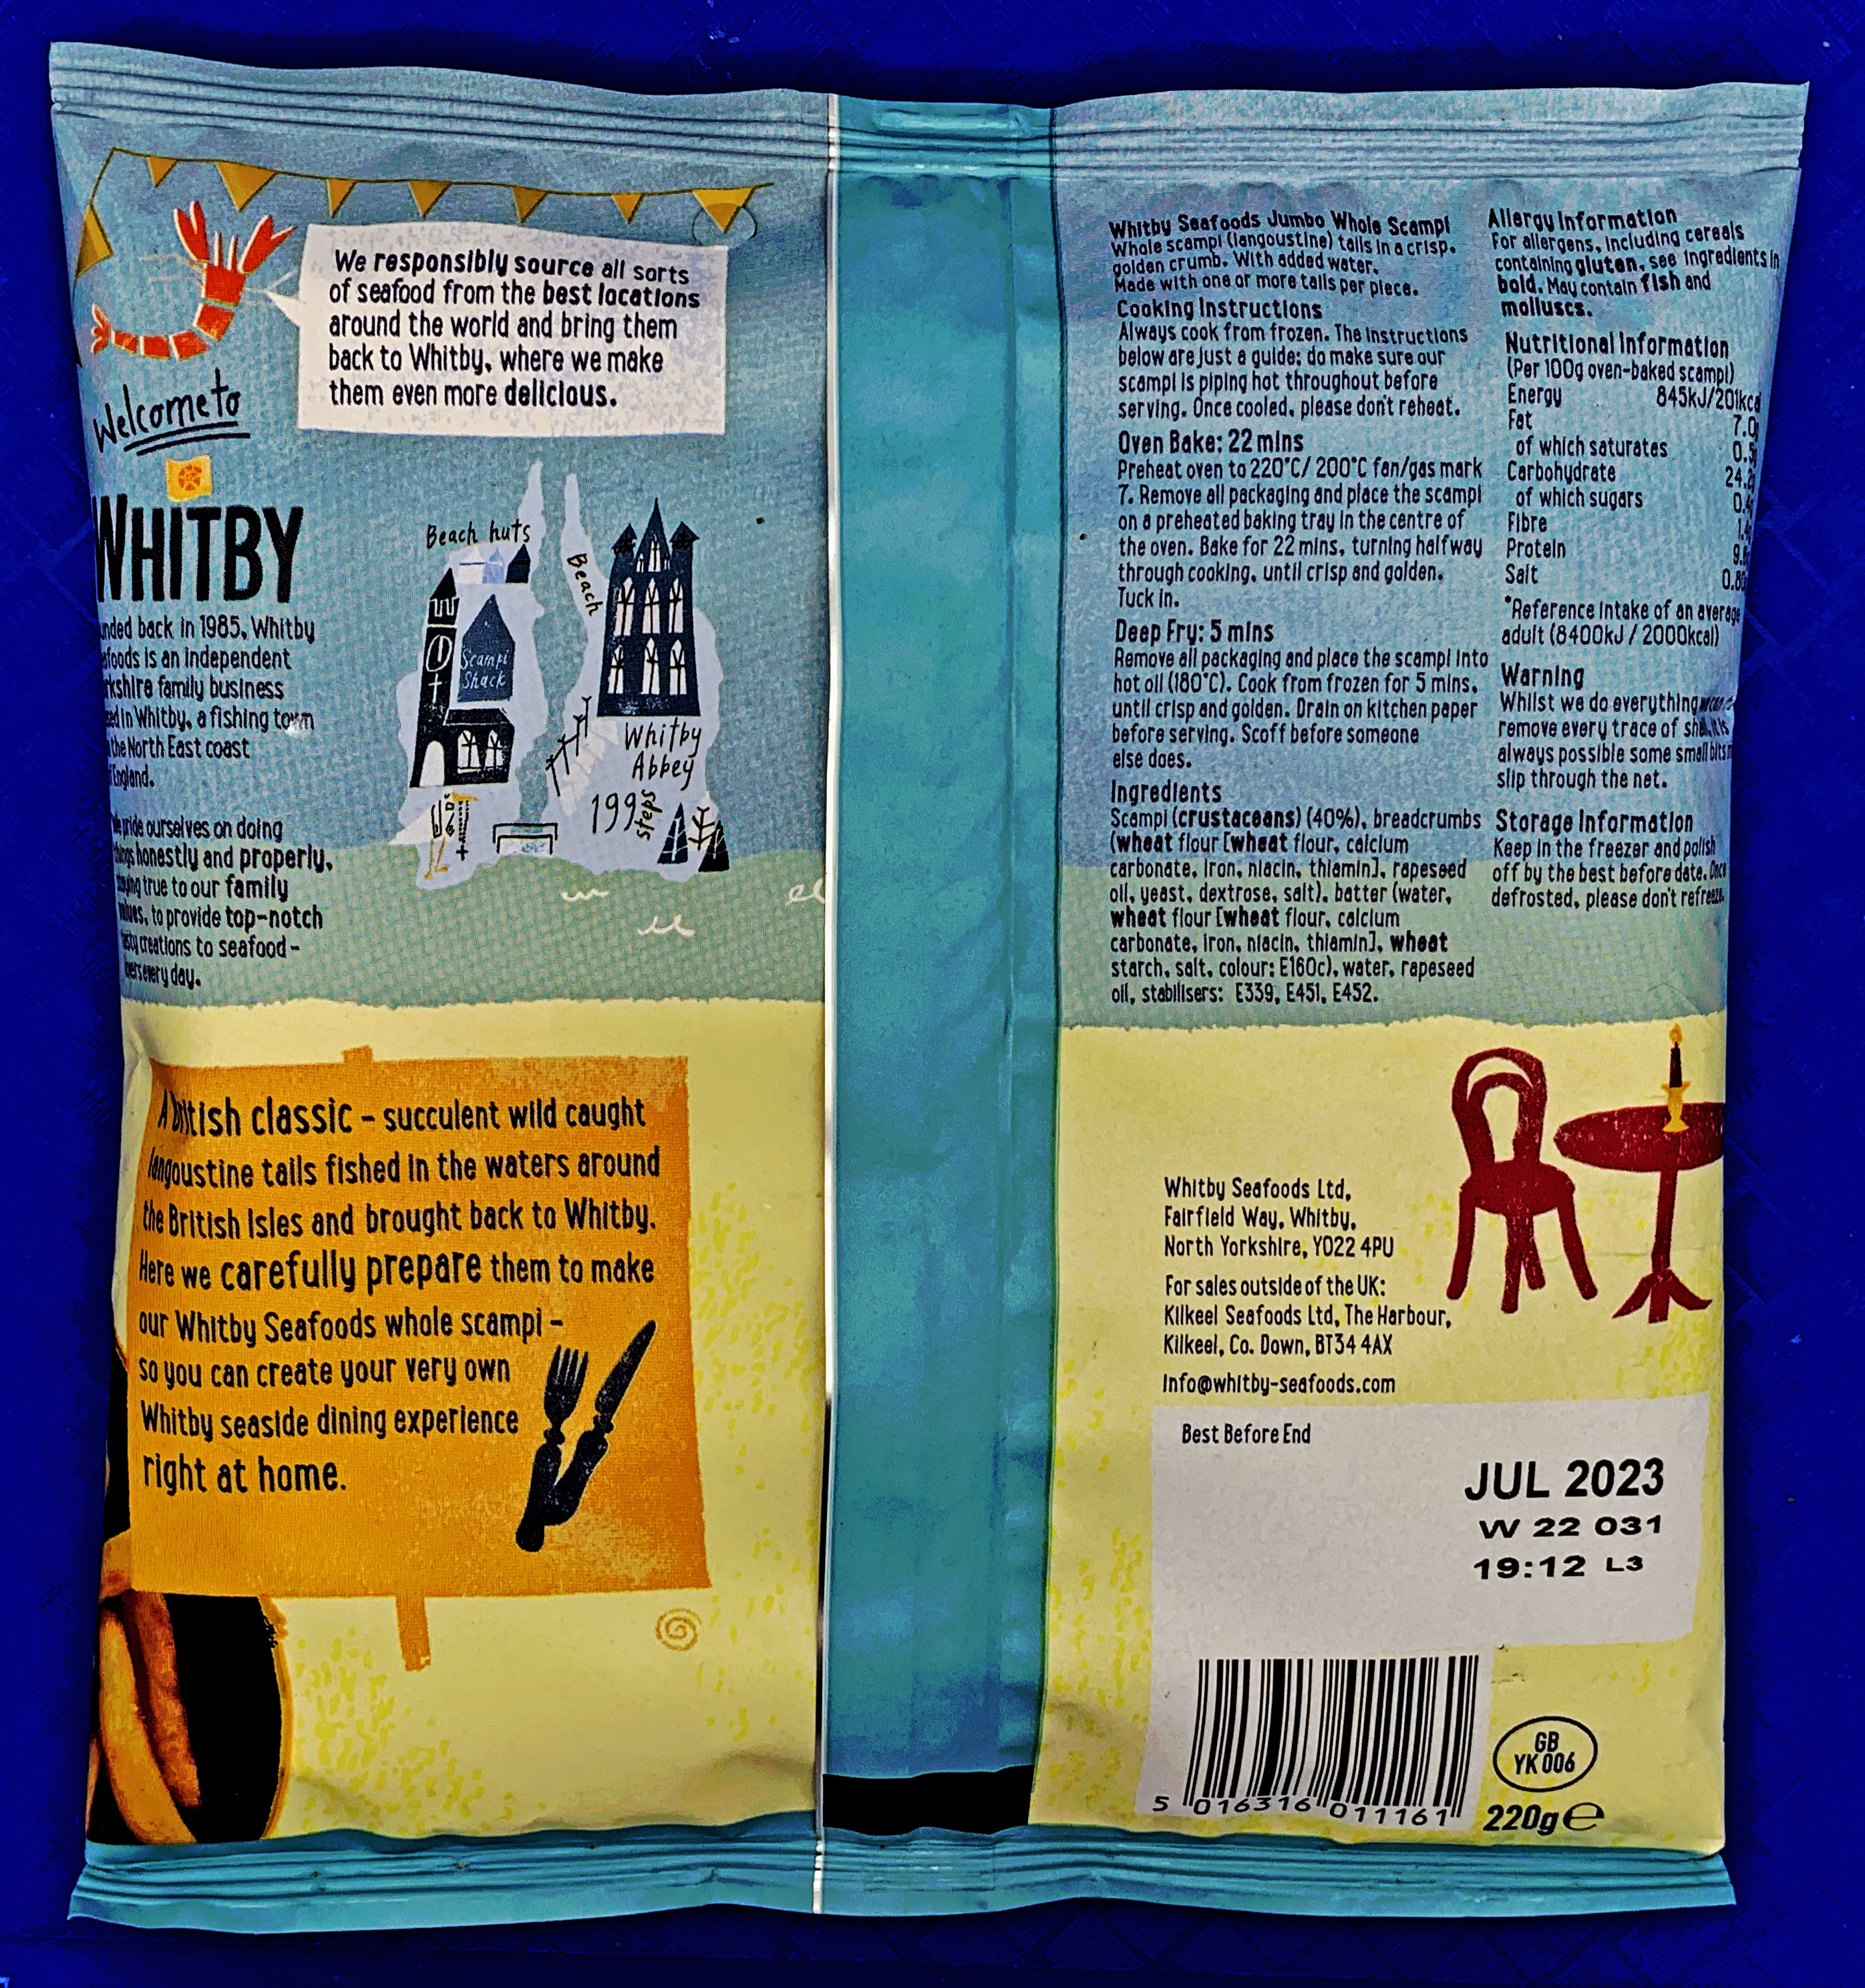 An example of a print on a Whitby Seafoods product packaging